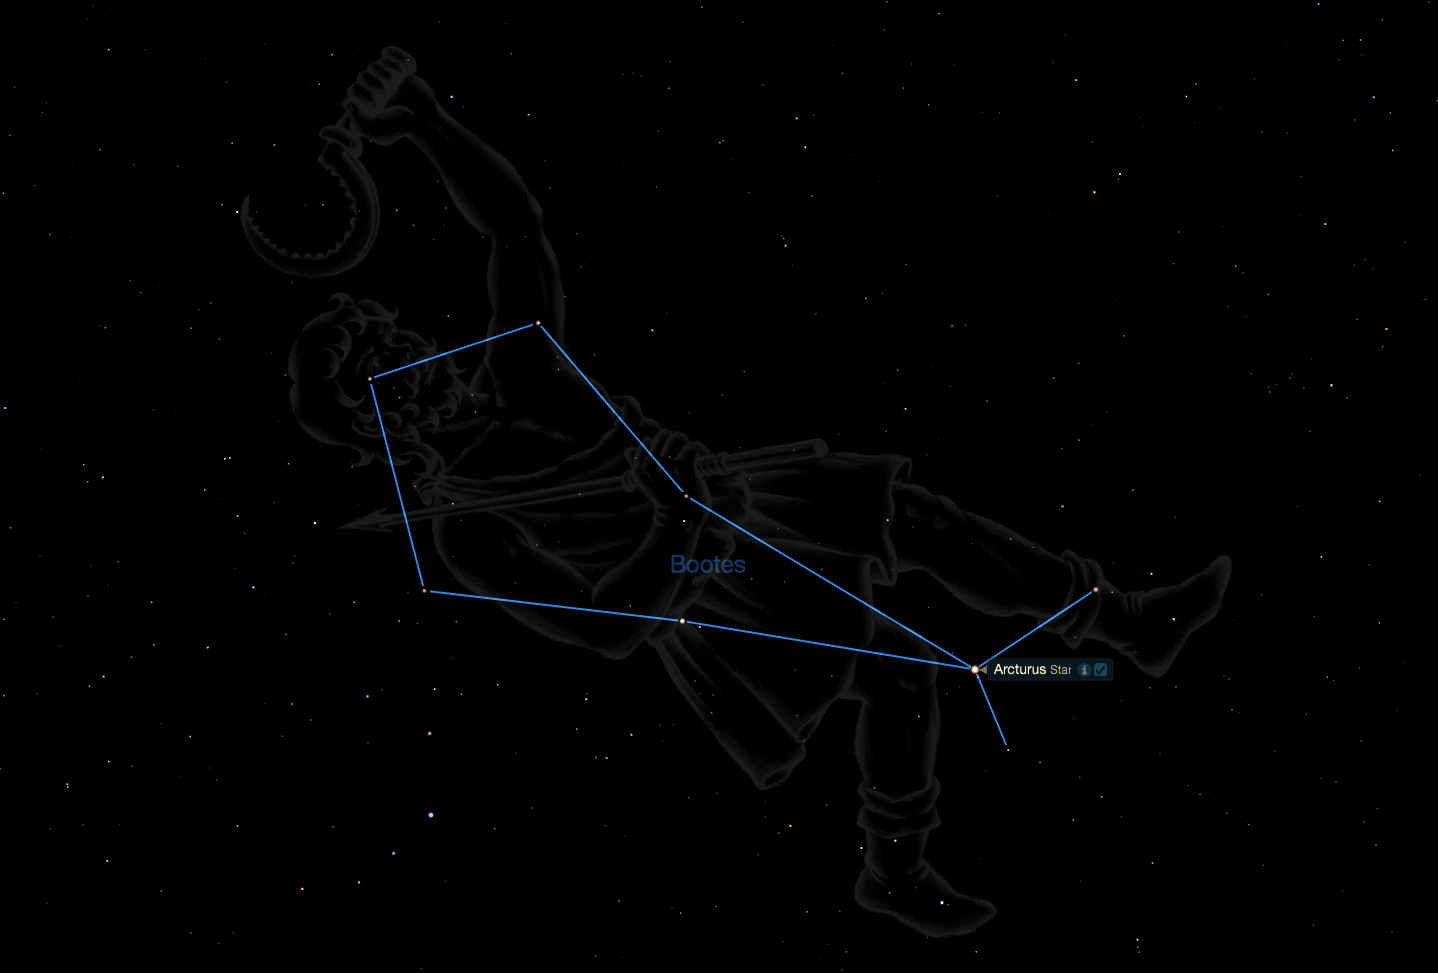 Sirius: The brightest star in the night sky comes into view